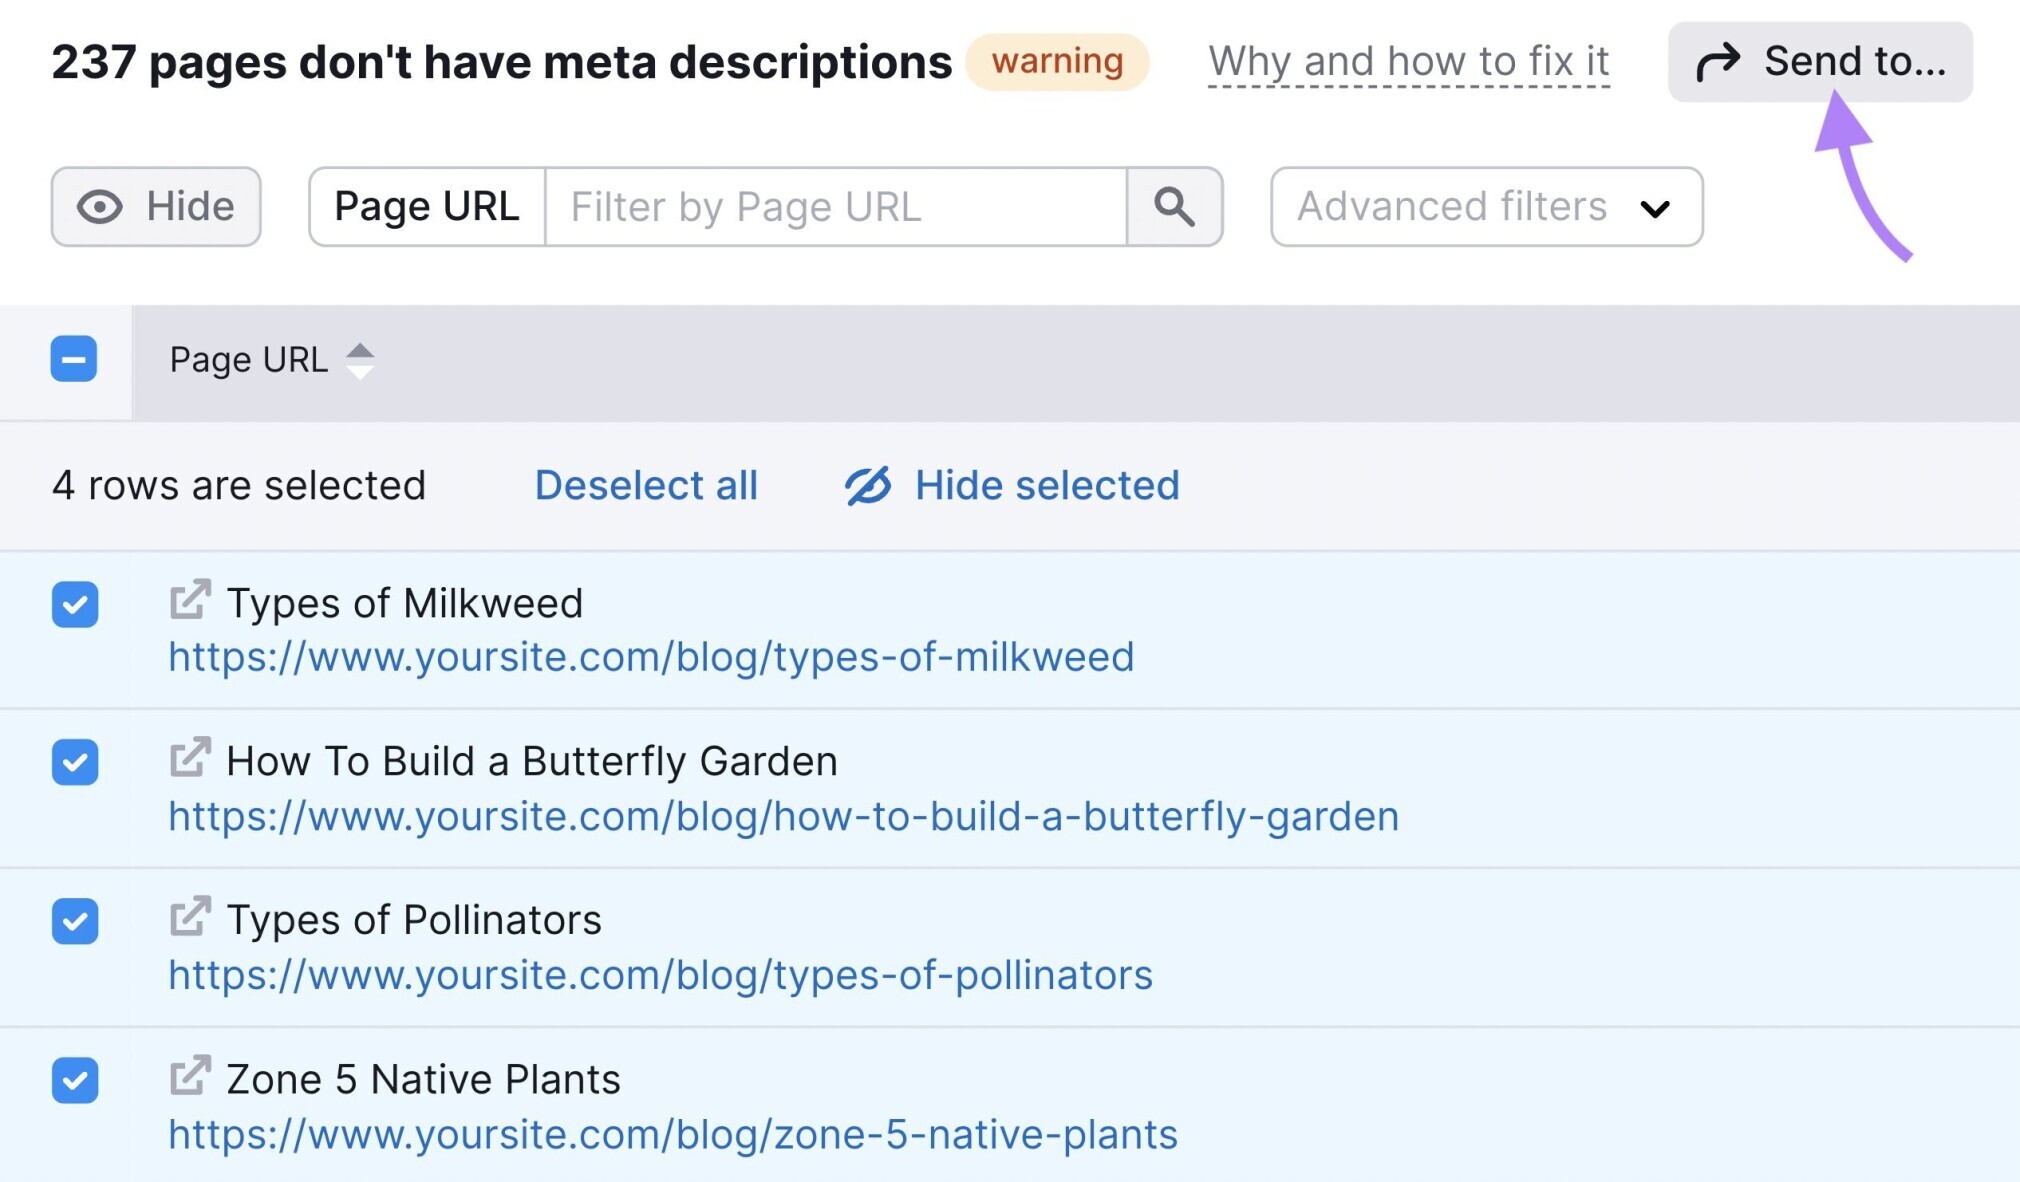 Send meta description warning issues to other tools